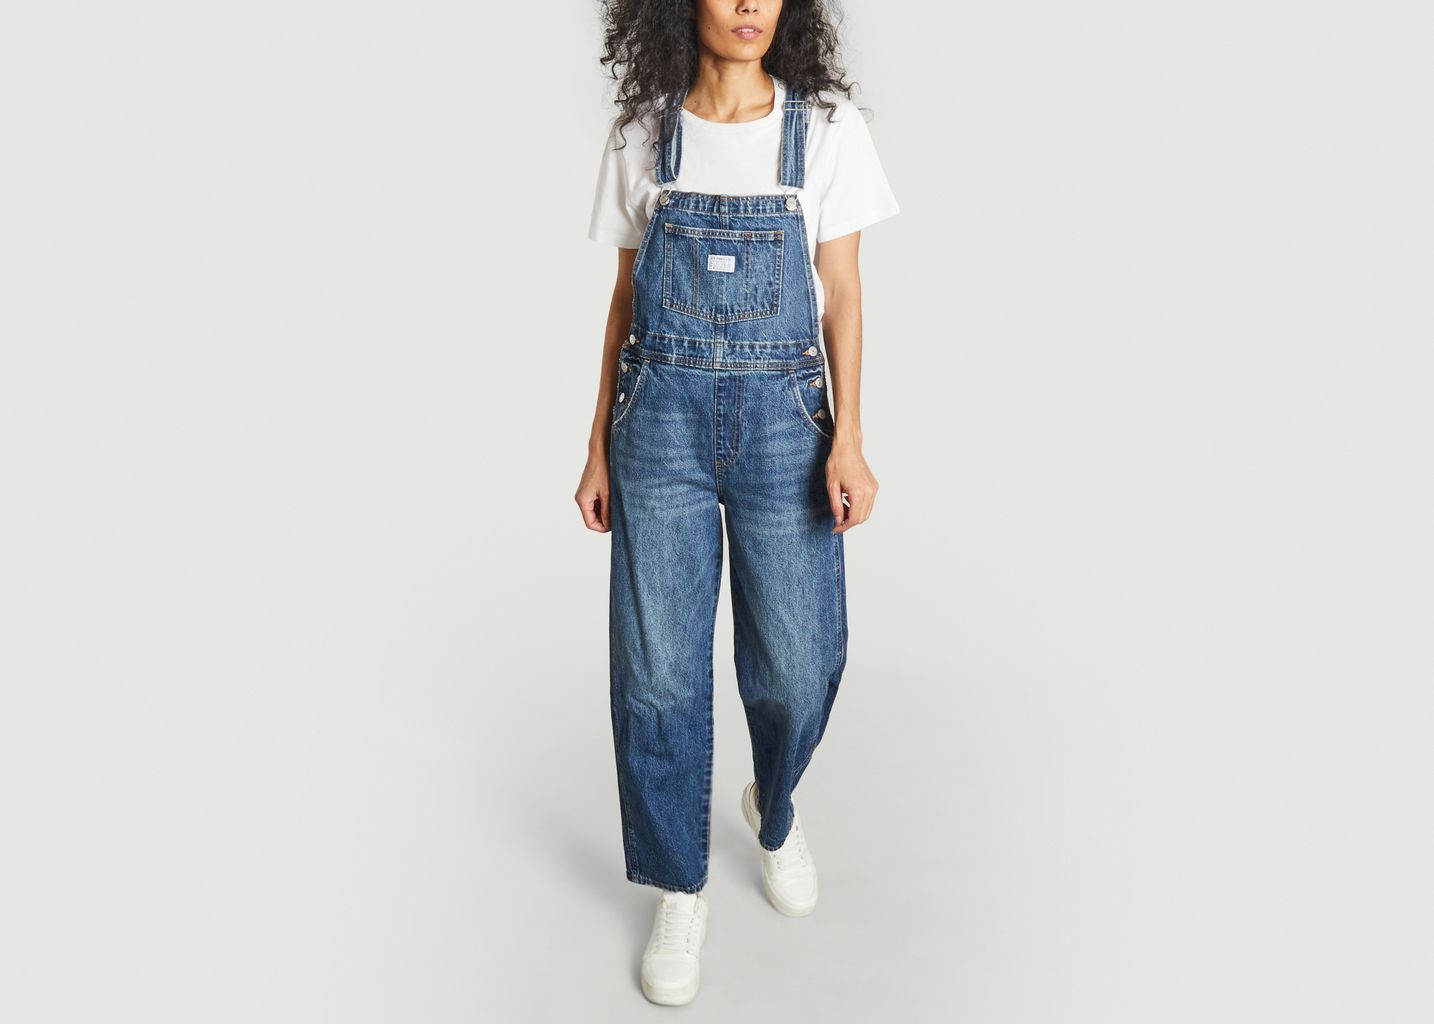 Vintage Overall Latzhose  - Levi's Red Tab